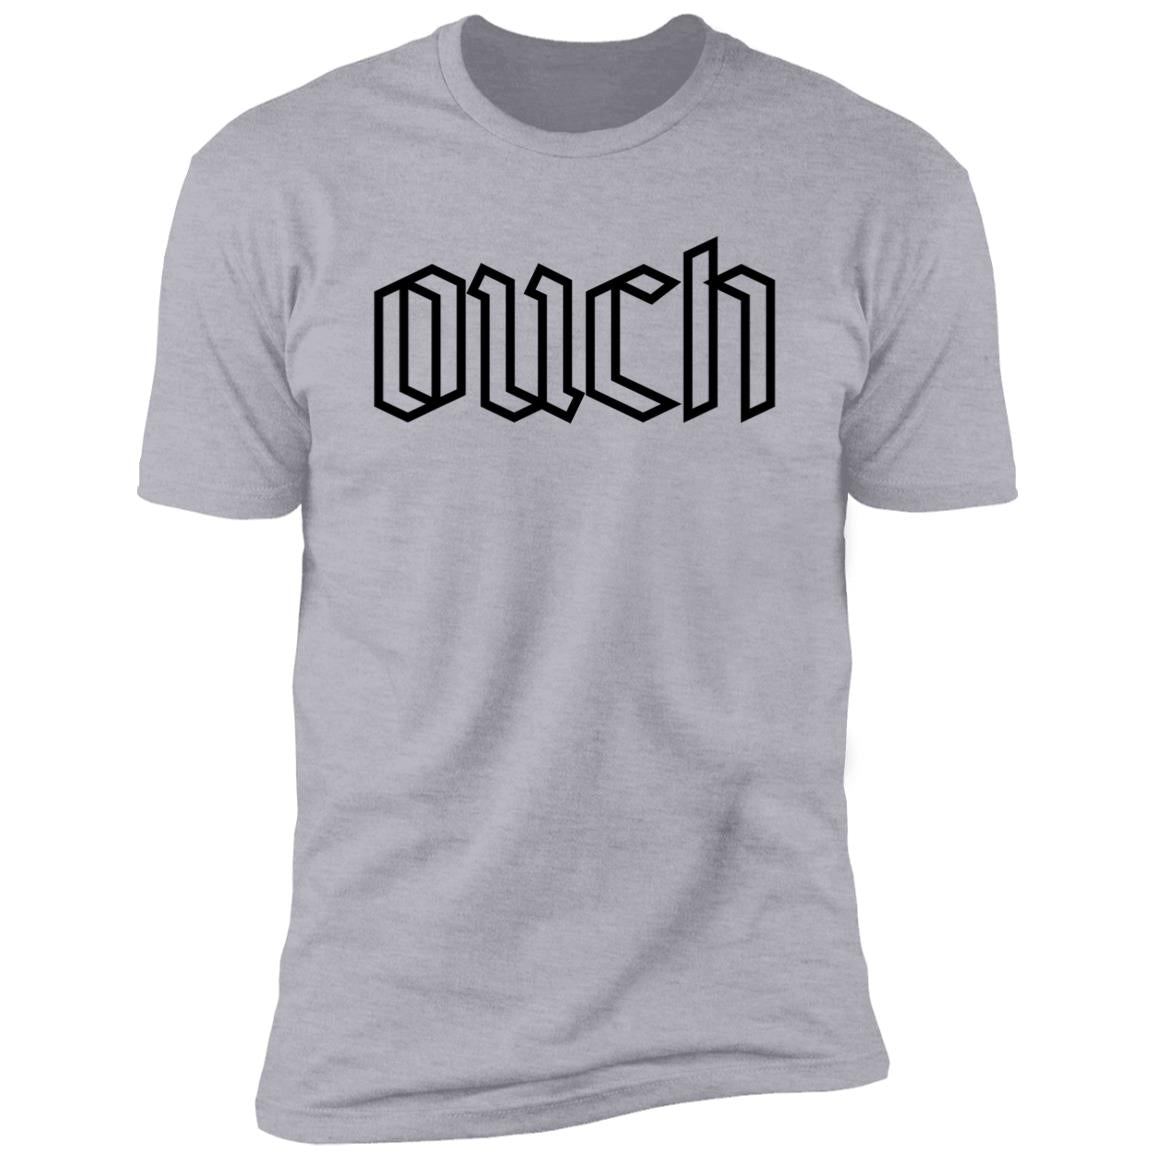 OUCH T-Shirt